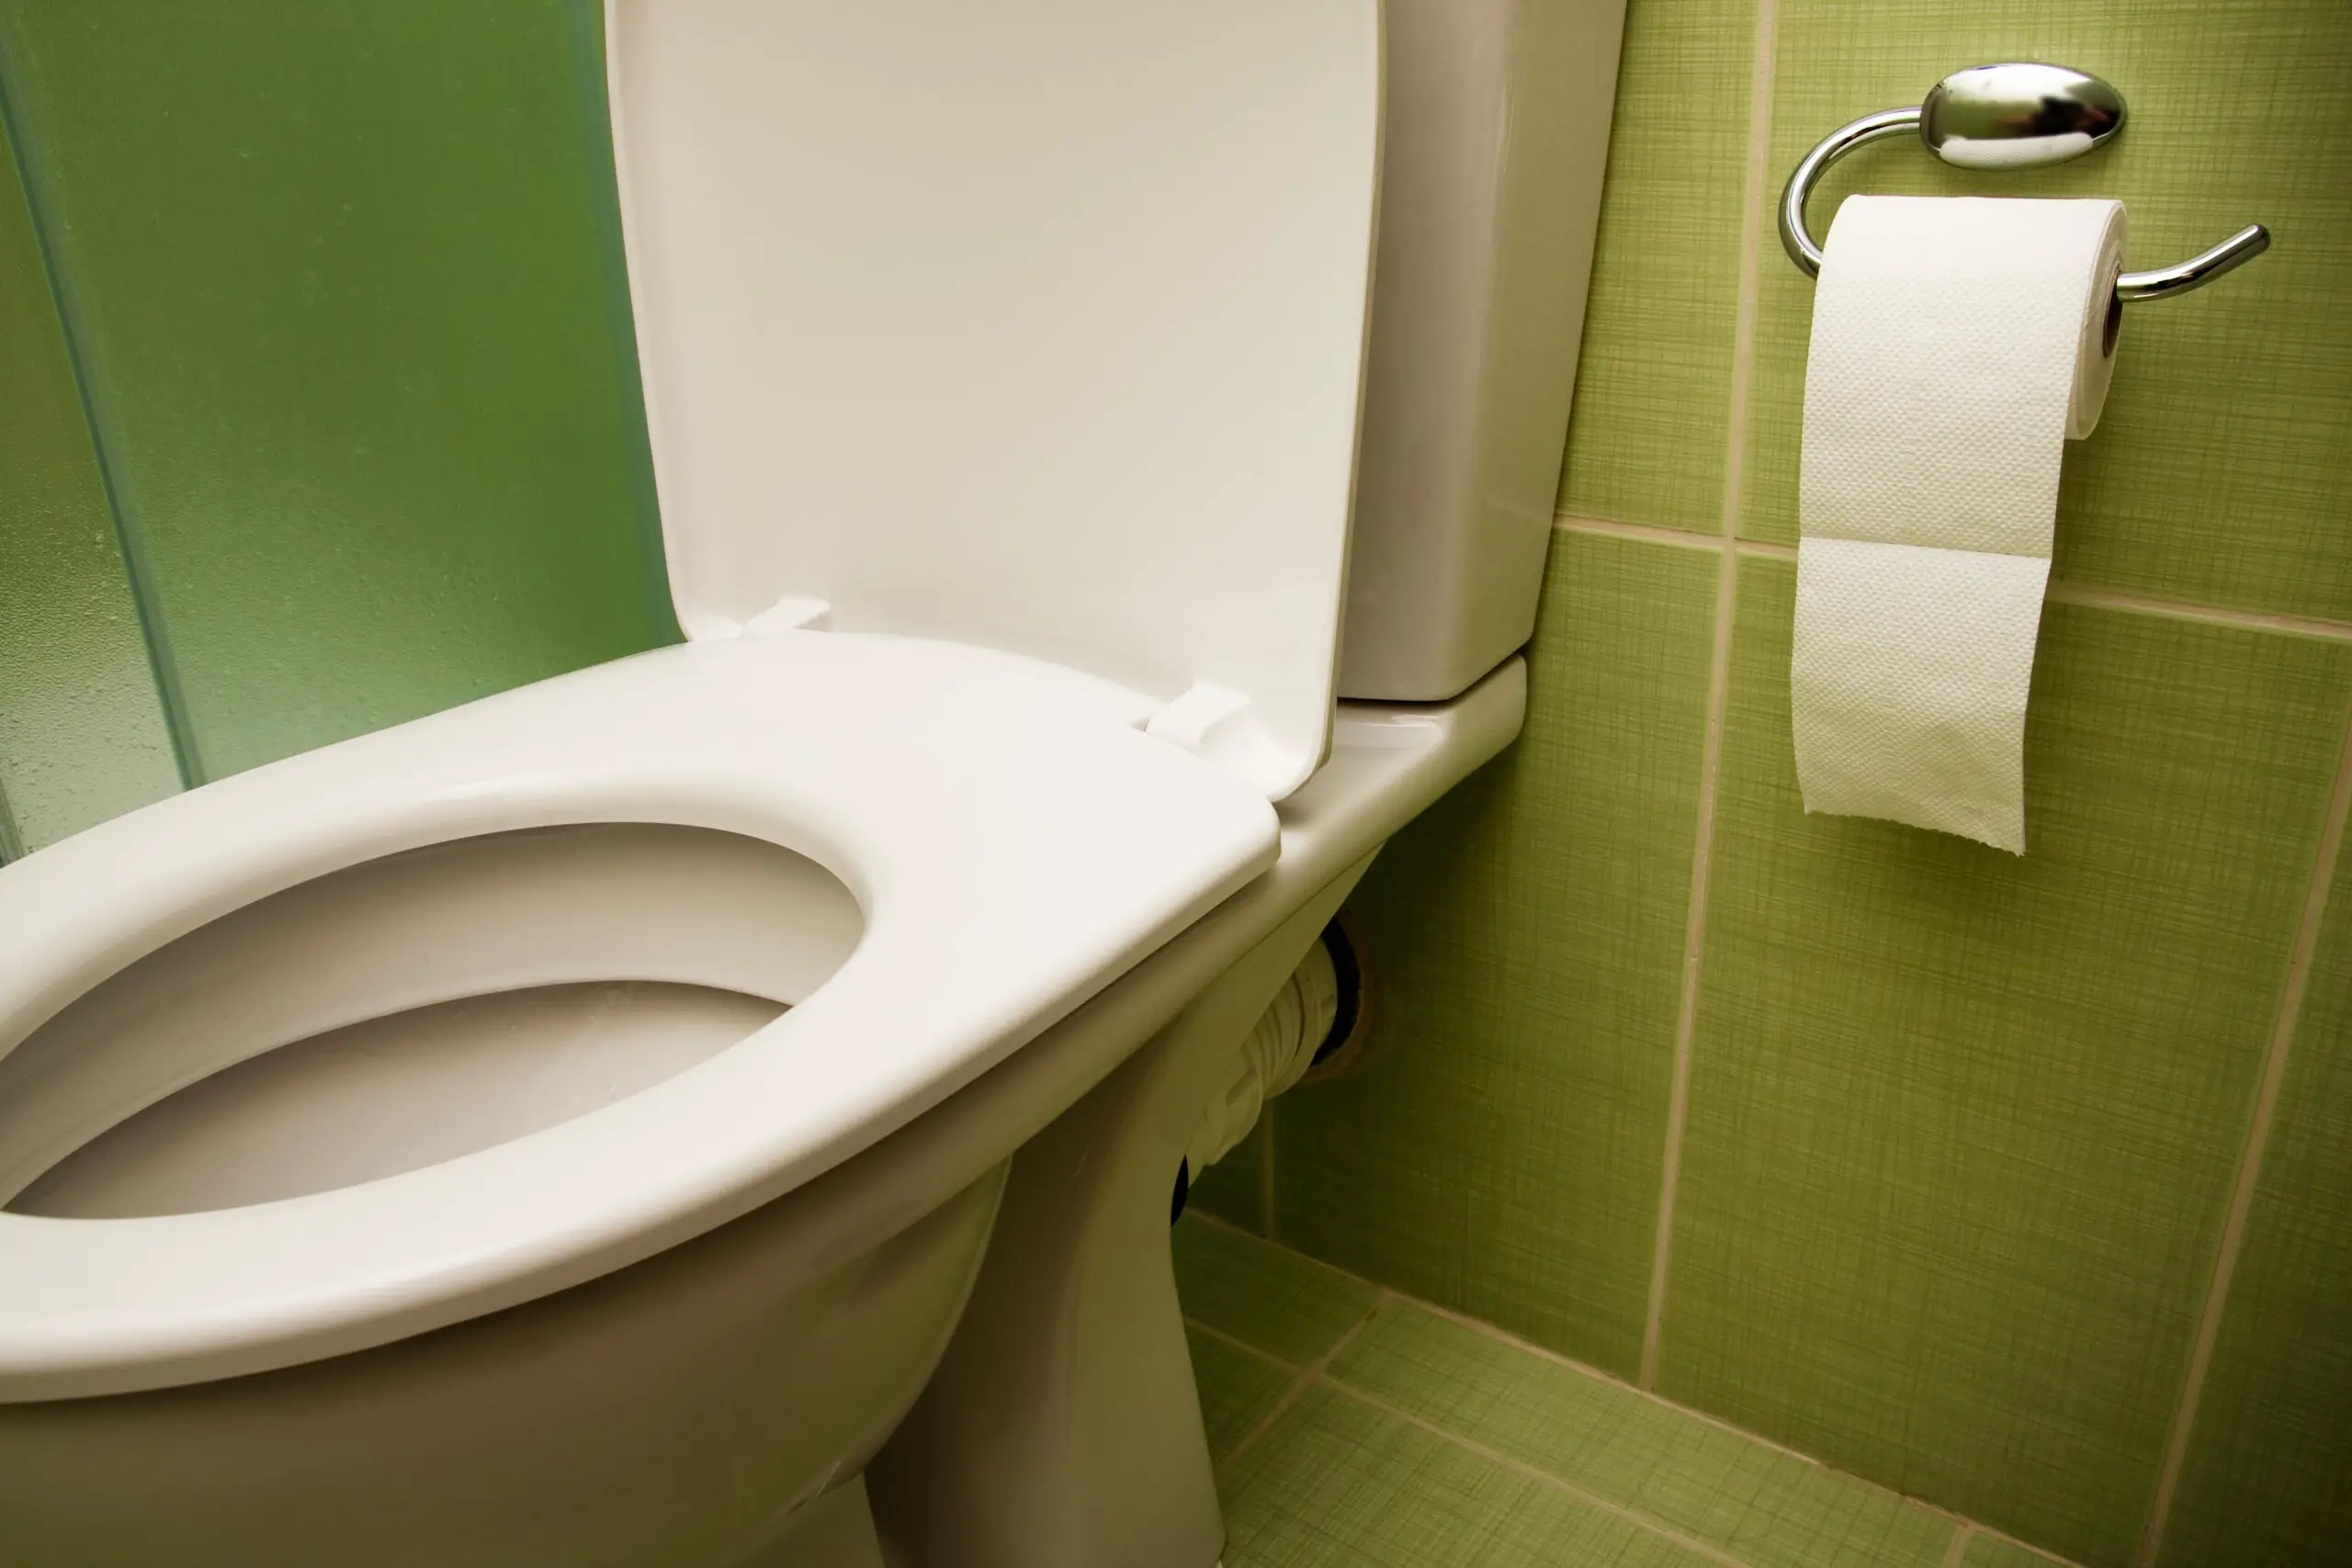 toilet seat and paper in bathroom